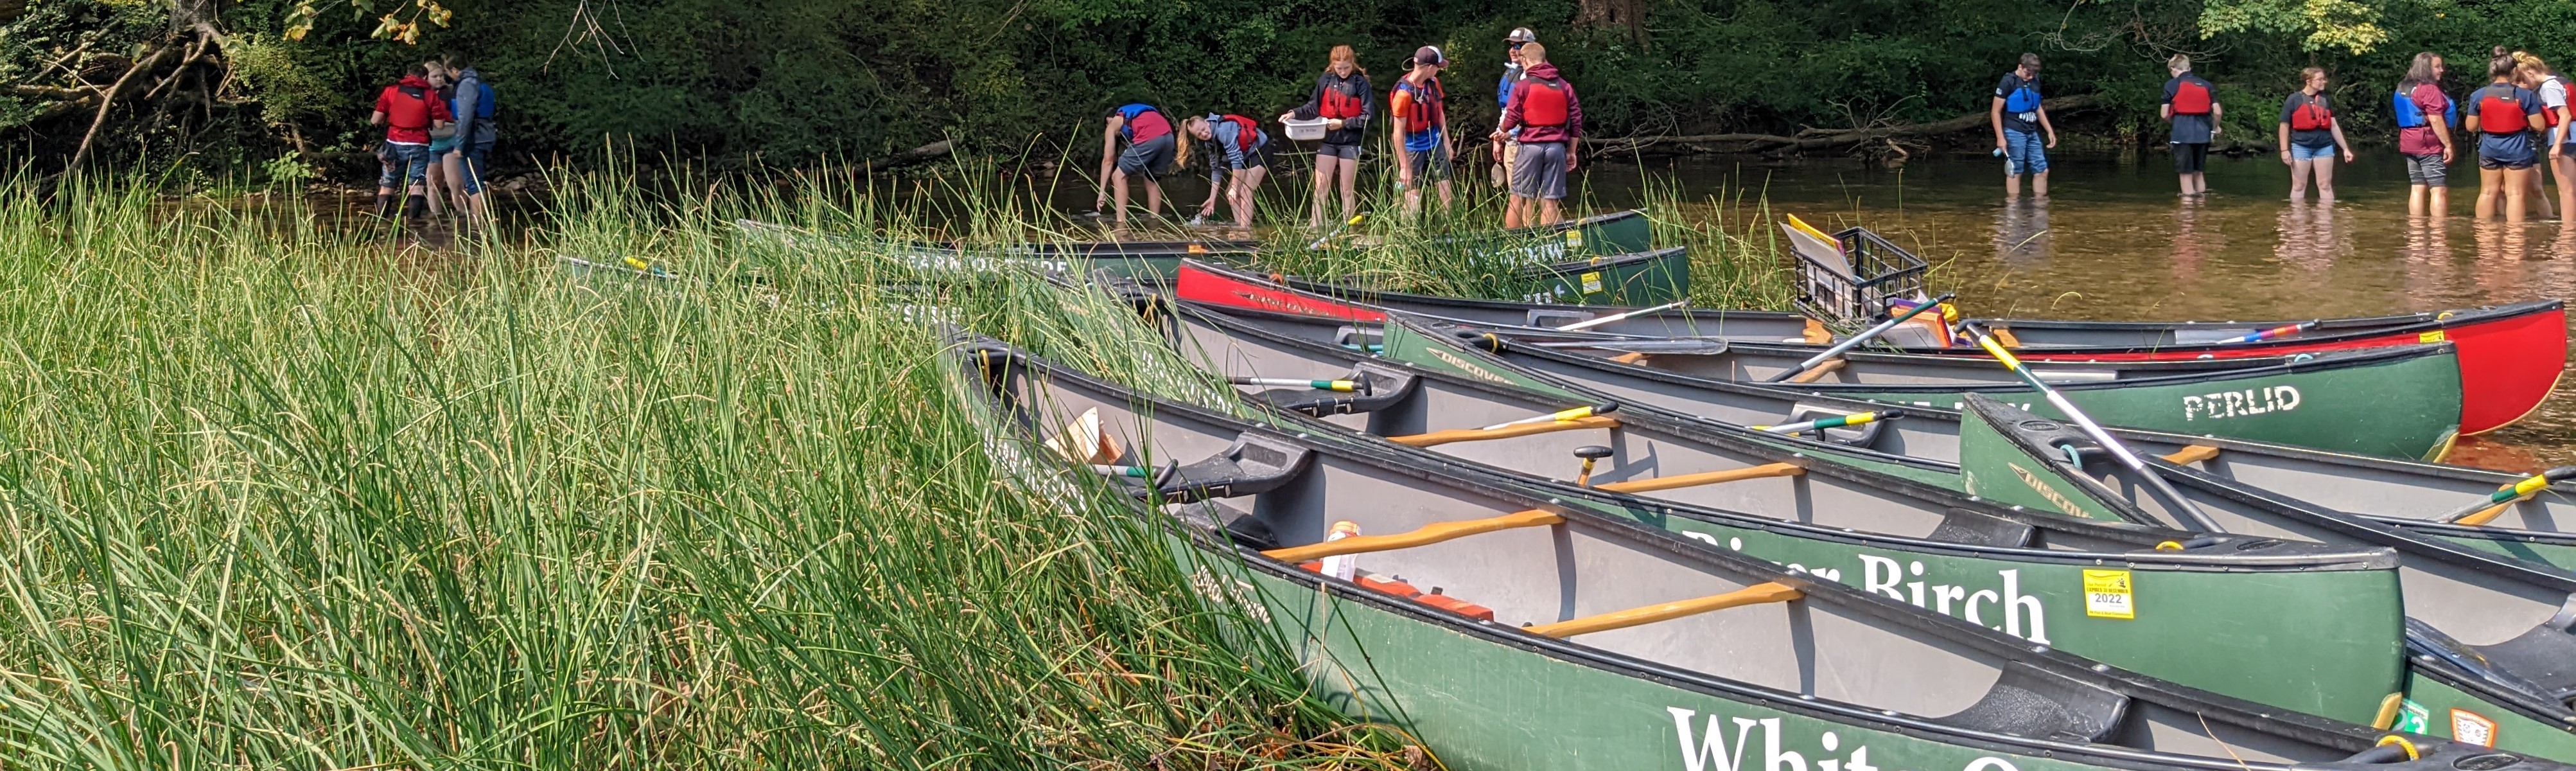 Green canoes are pulled up into the reeds, where students stand in shallow water by the bank and explore.